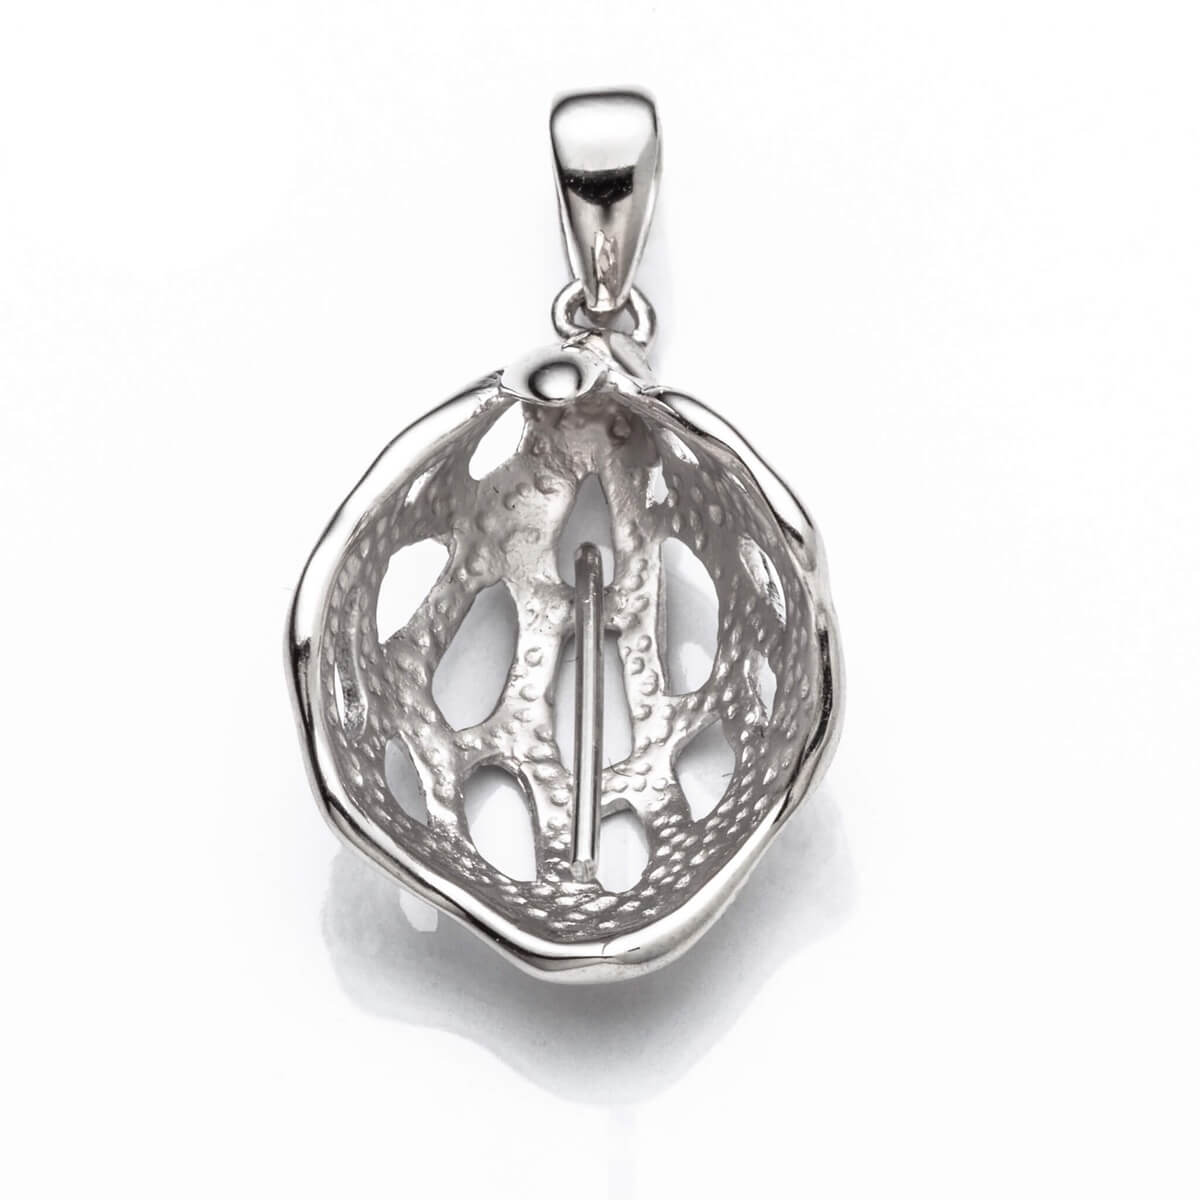 Strawberry Pendant with Peg Bezel Mounting and Bail in Sterling Silver 7mm